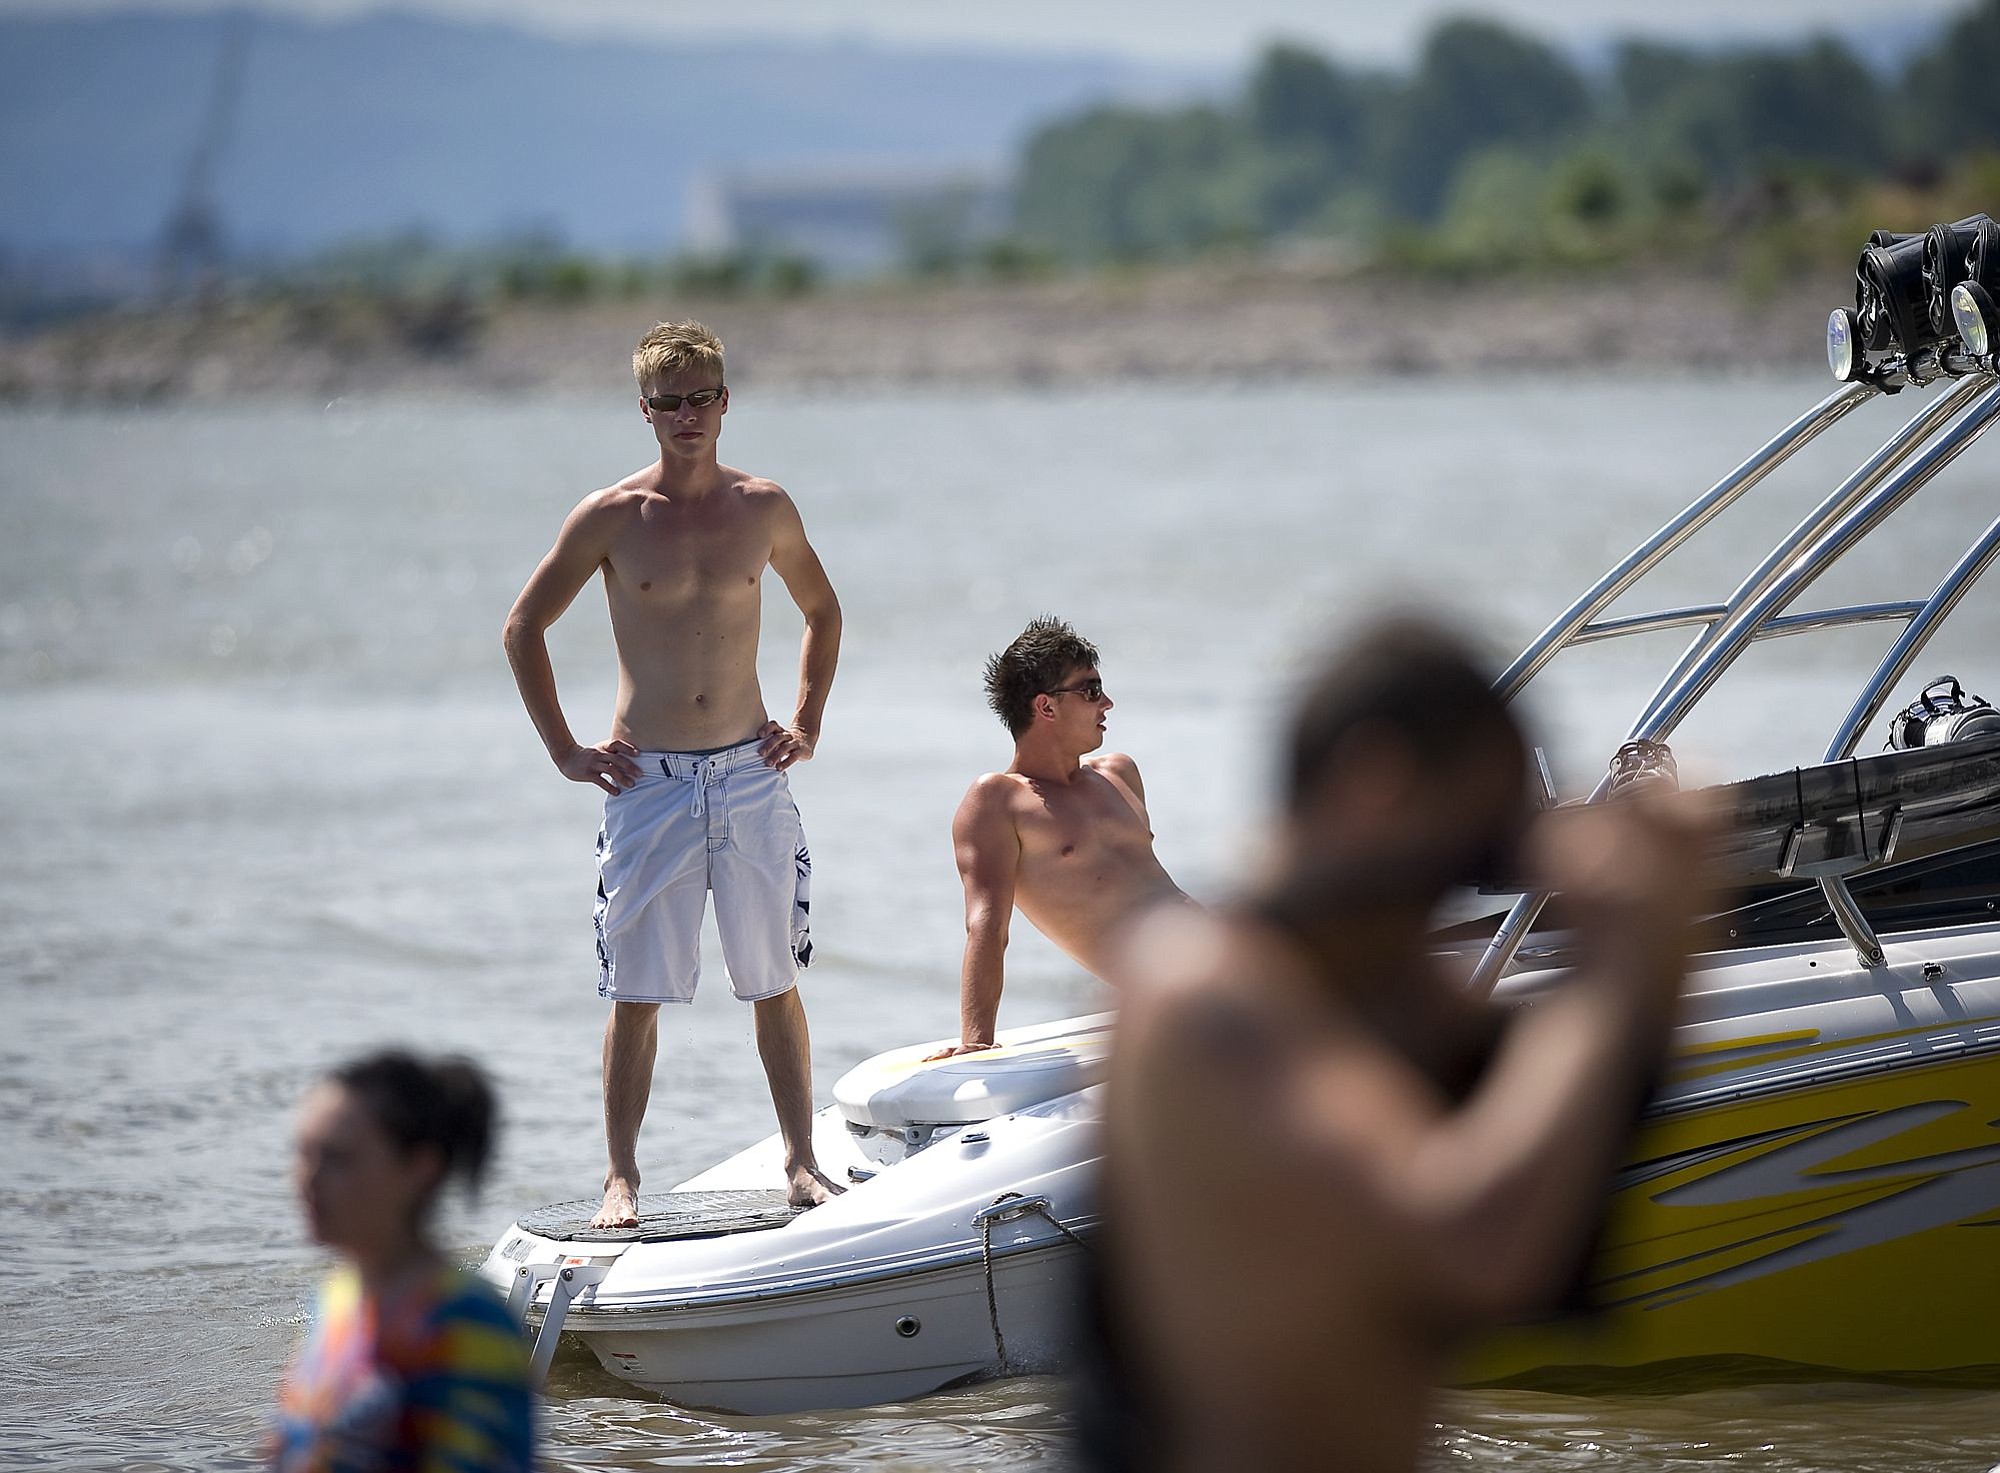 Russ Terekhov, center left, 22, looks along the beach from the stern of his ski boat while he and his friend Rod Nekrasov, 21, wait for more friends before going wakeboarding Sunday at Wintler Park.